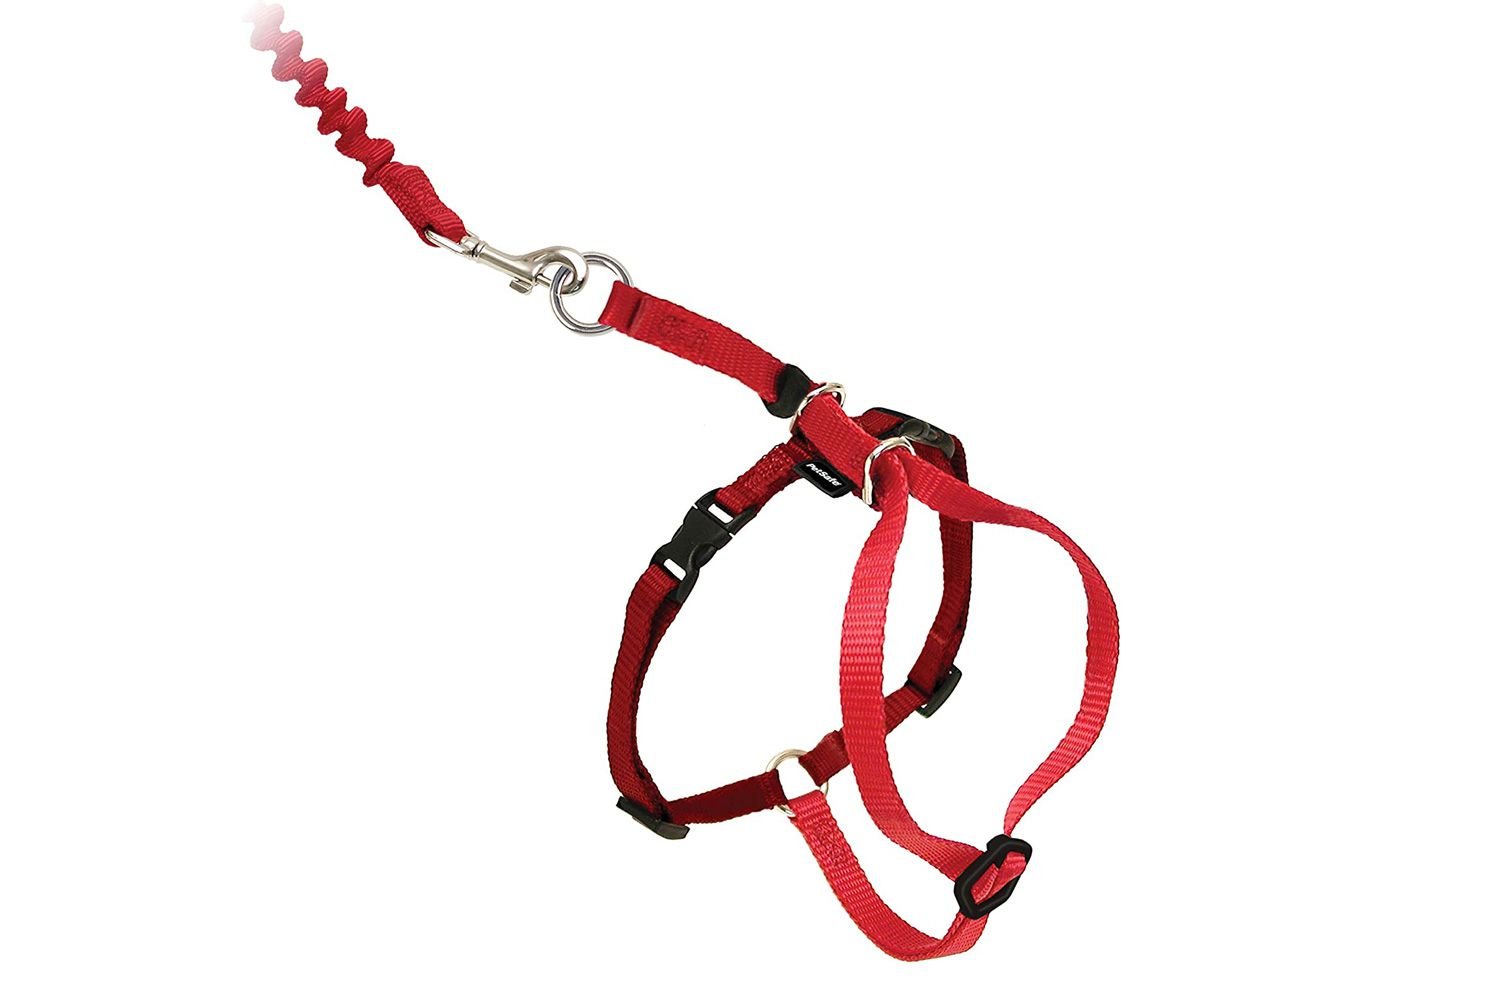 Training a cat to use a leash requires a sturdy and lightweight cat harness.